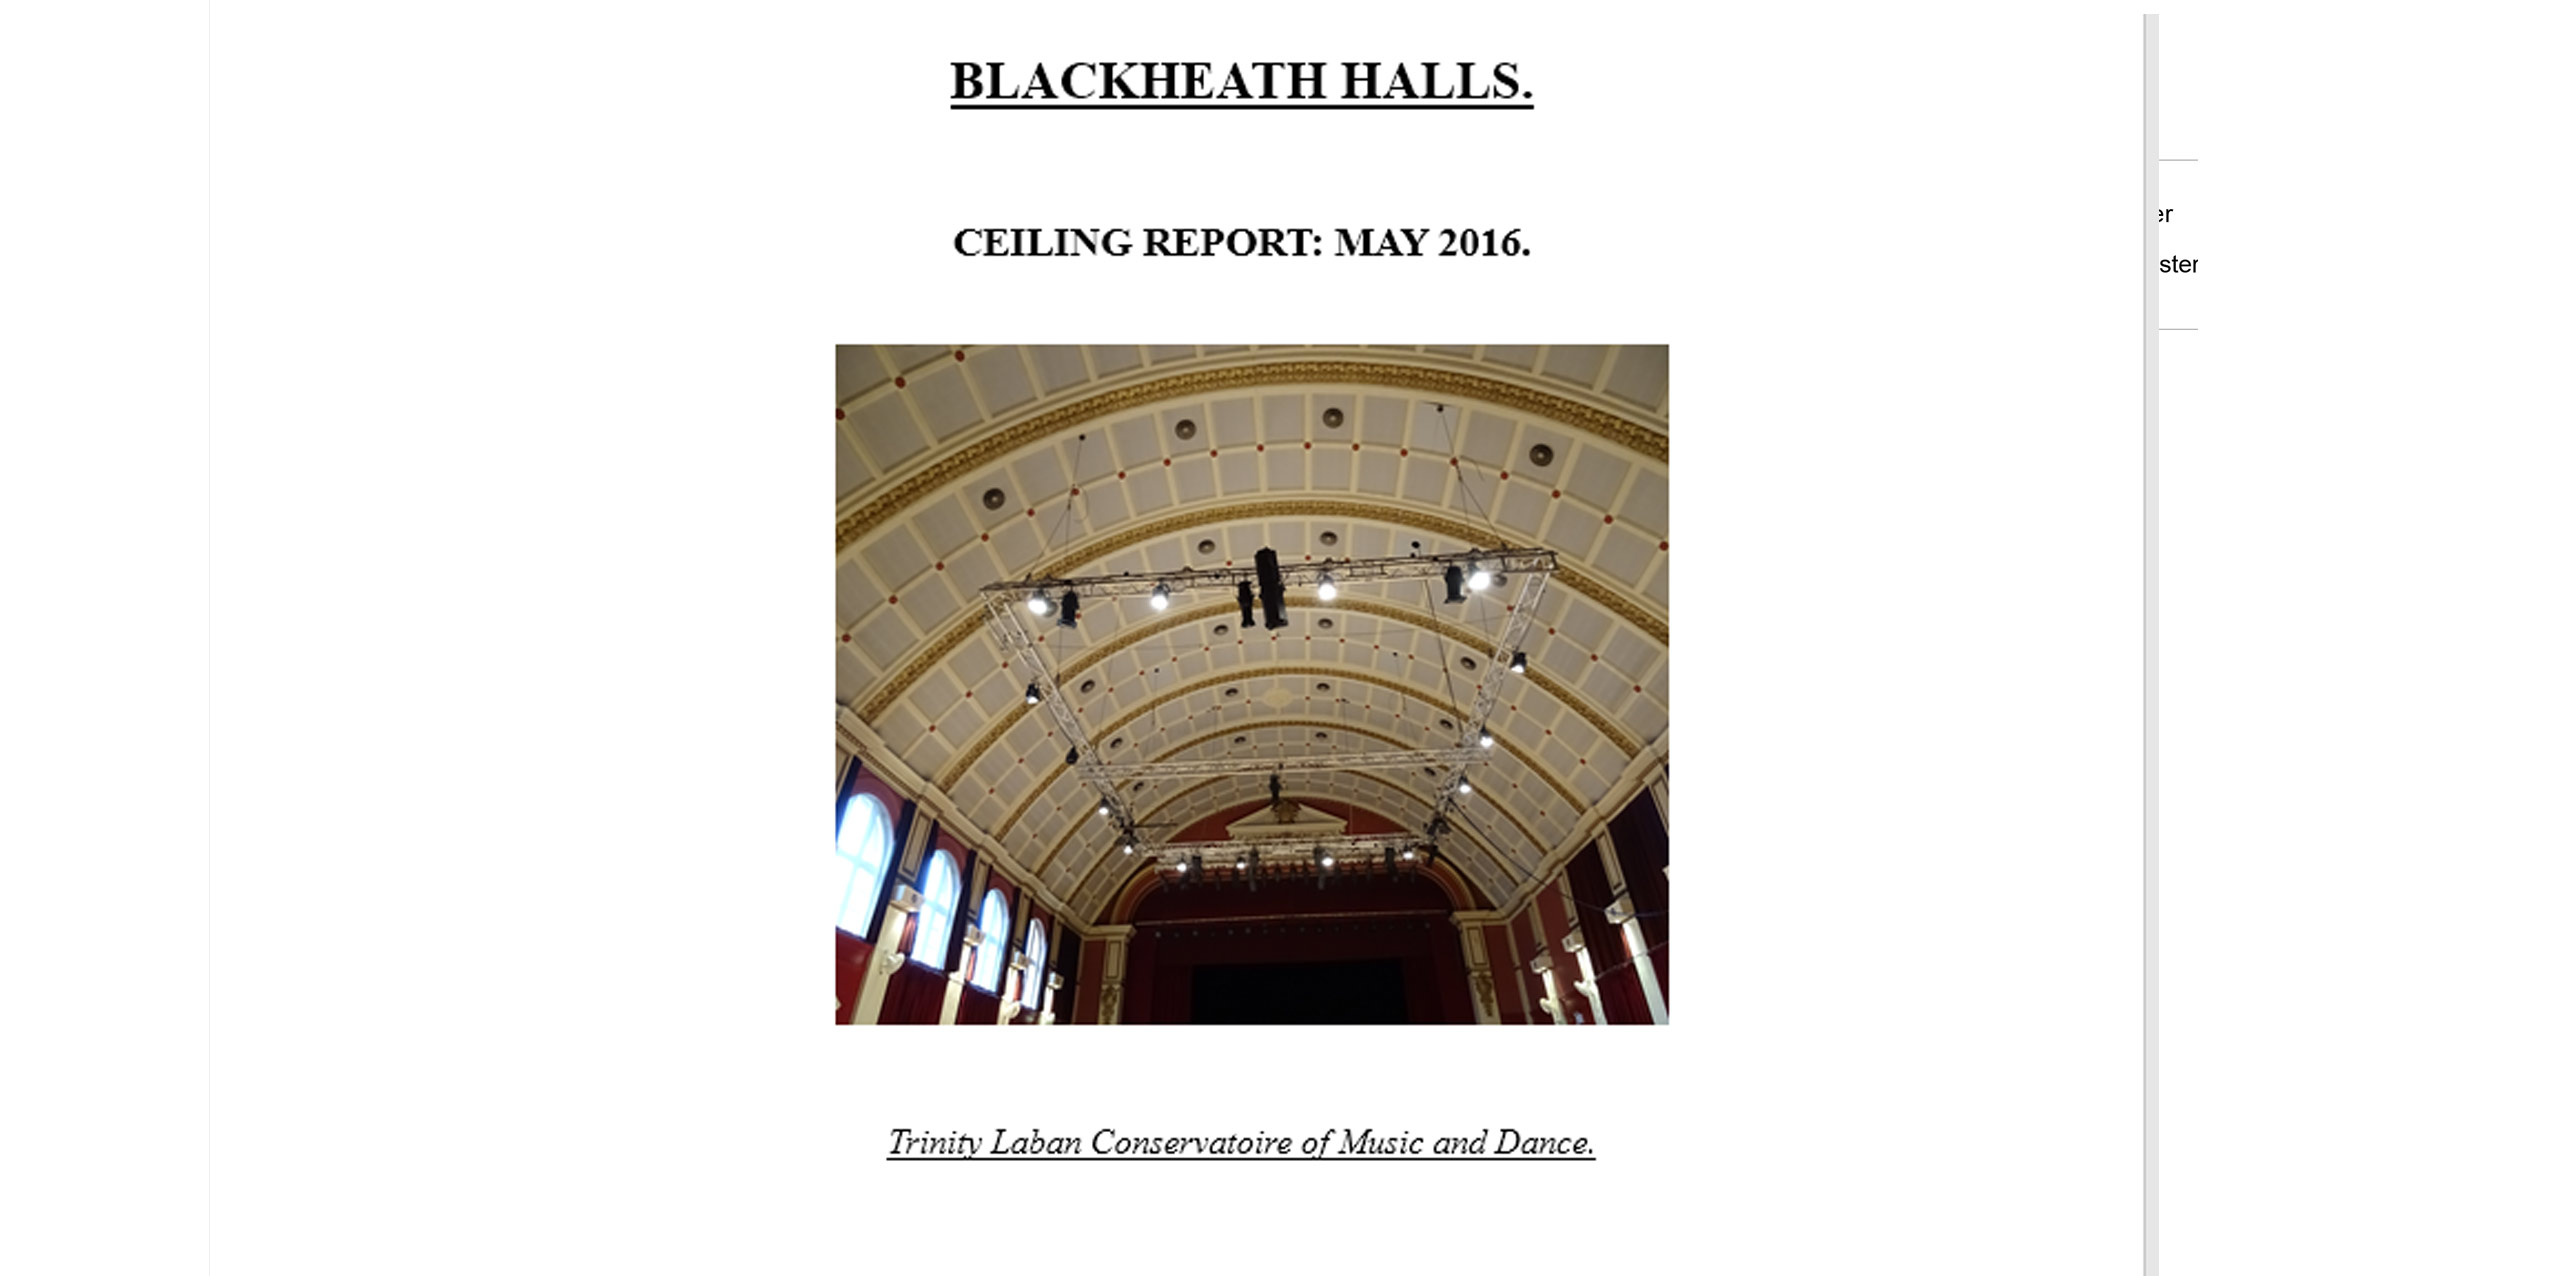 Archive Ceiling Report Cover